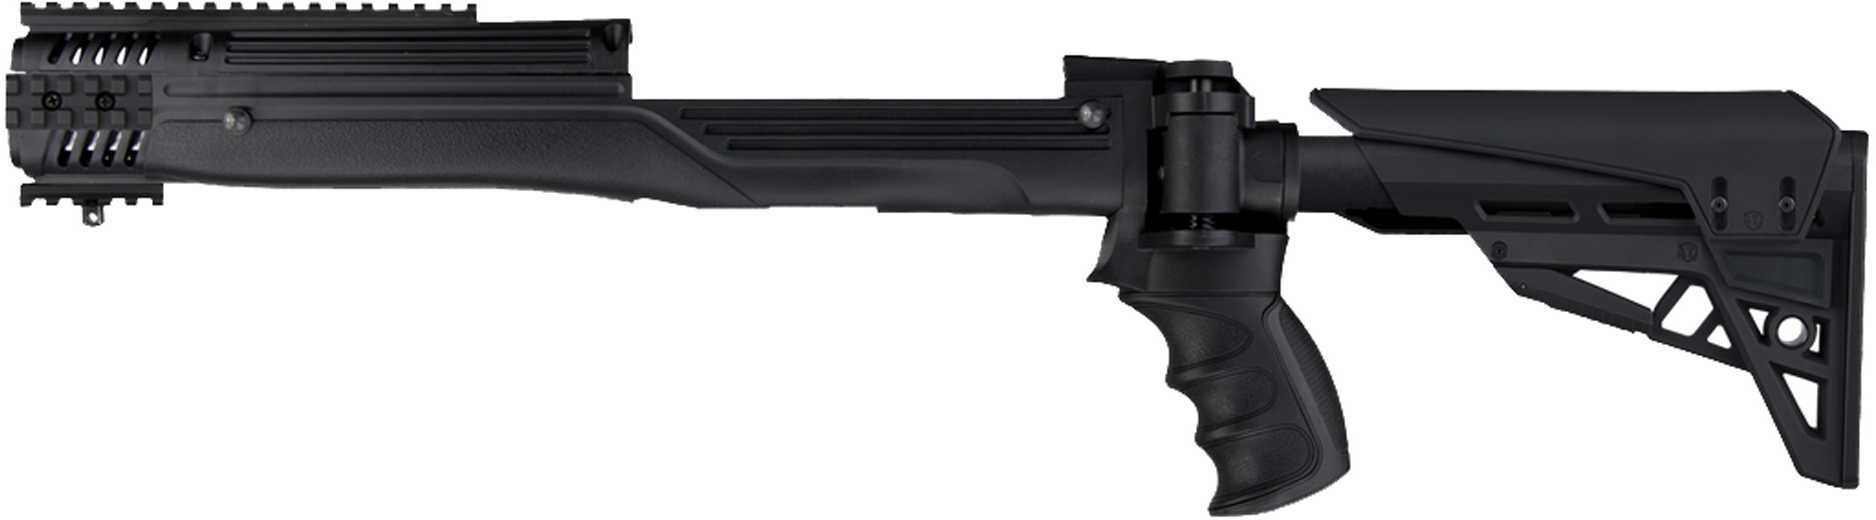 ATI Ruger® Mini-14 TactLite 6 Position Adjustable Side Folding Stock With Scorpion Recoil System